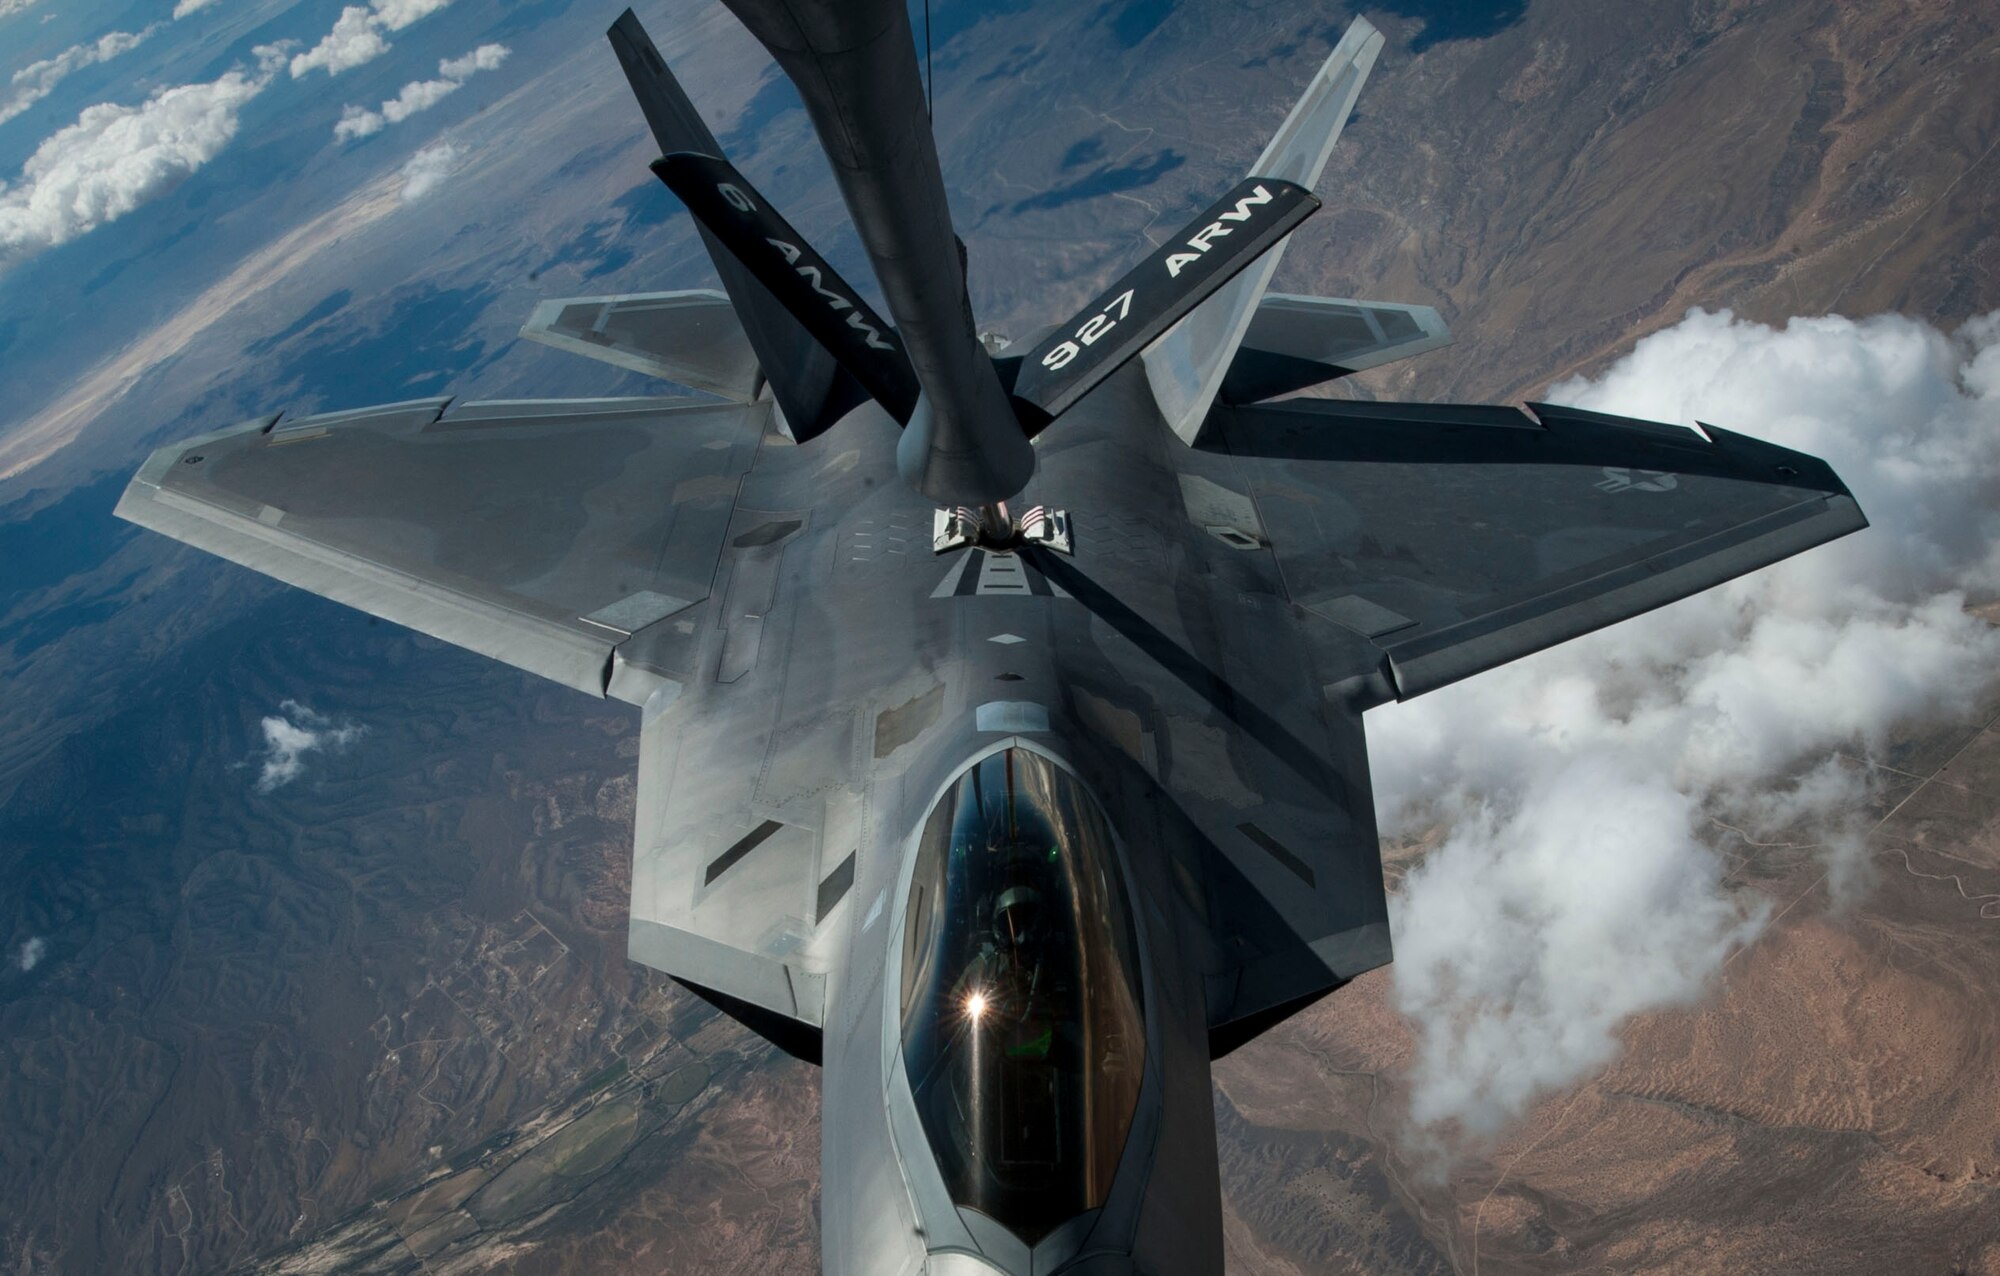 An F-22 Raptor, from Joint Base Langley-Eustis, Va., receives fuel from a KC-135 Stratotanker over the Nevada Test and Training Range in a training sortie during Red Flag 16-3, July 21, 2016. Red Flag, which is conducted by the 414th Combat Training Squadron at Nellis AFB, is a realistic combat training exercise involving the air forces of the U.S. and its allies that maximizes the combat readiness and survivability of participants by providing a realistic training environment. (U.S. Air Force photo by Senior Airman Jake Carter/Released)